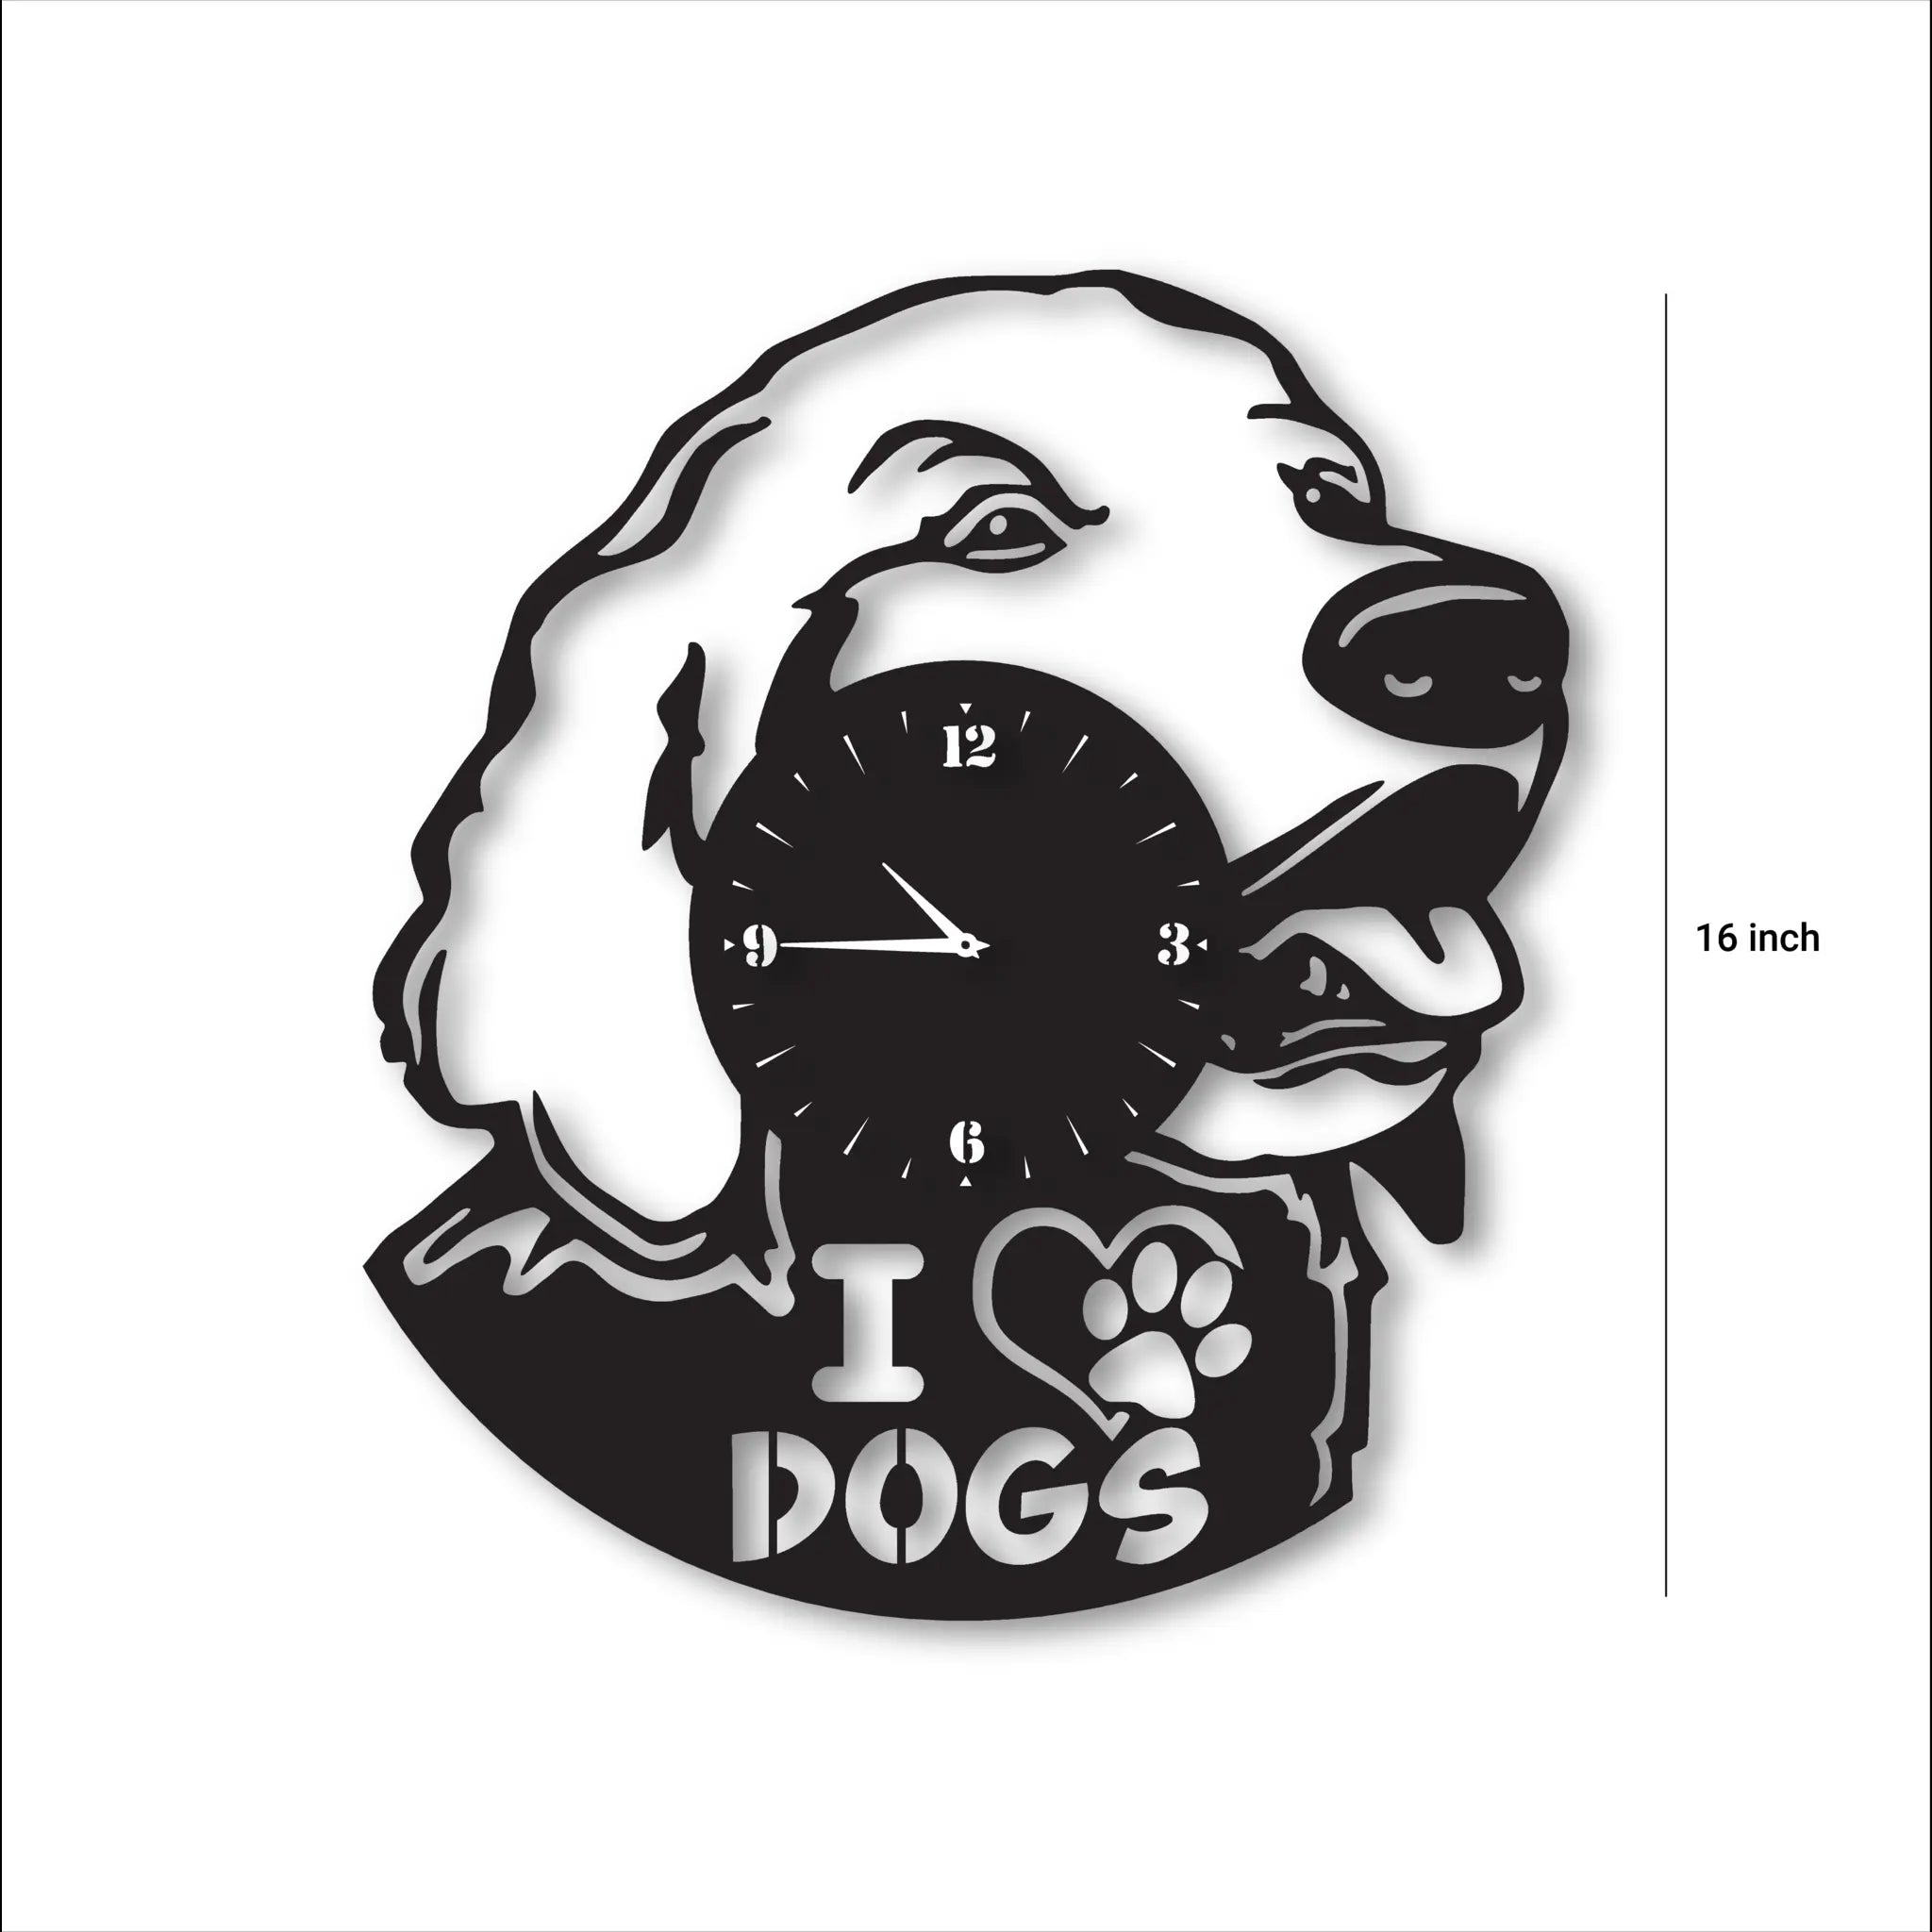 Dog Metal Record Wall Clock | Pets Wall Art, Room Décor, Wall Décor | Gift Idea for Dogs lovers | Made from Real Vintage Metal Record